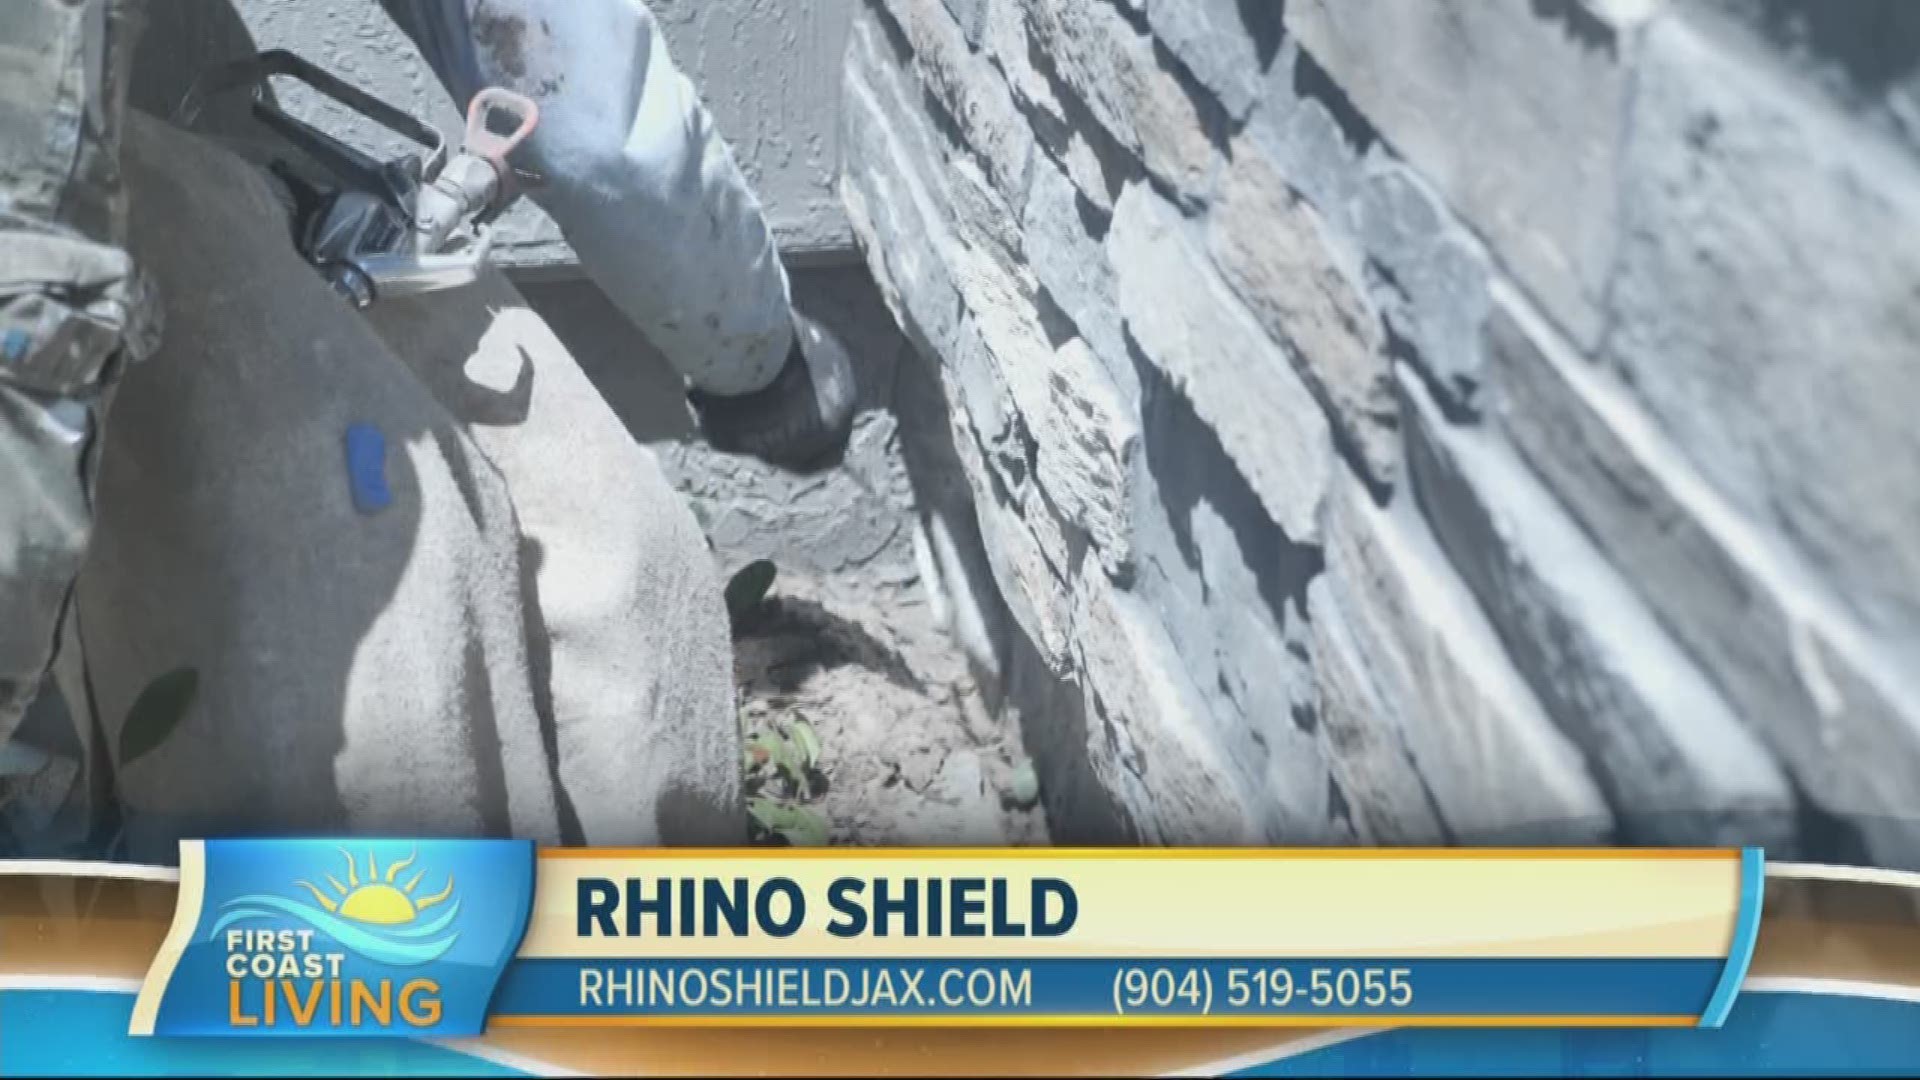 We're giving you an up close look at how Rhino Shield works.